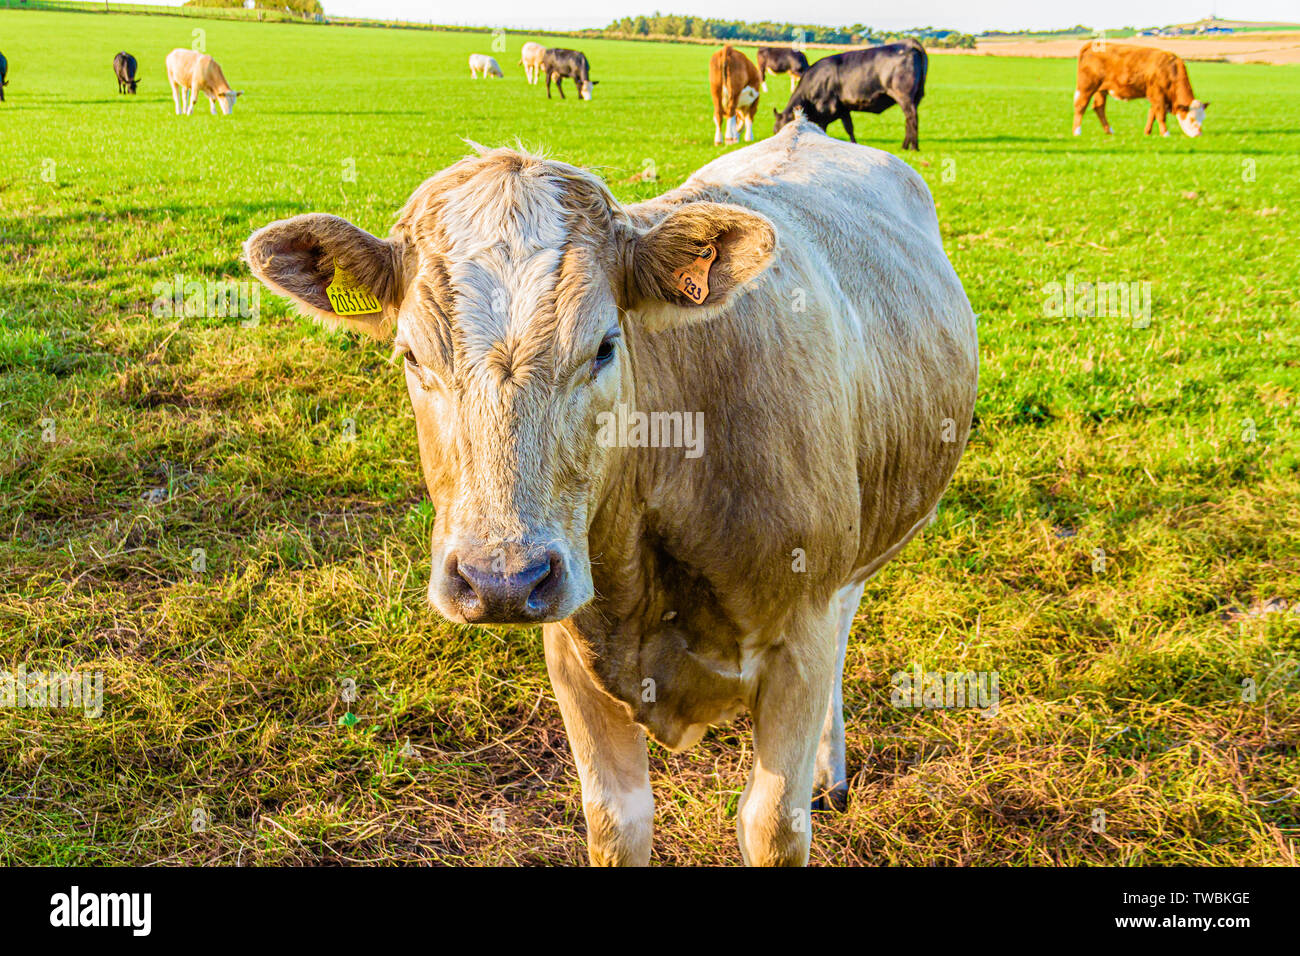 A cow in a field in Northumberland, UK. September 2018. Stock Photo